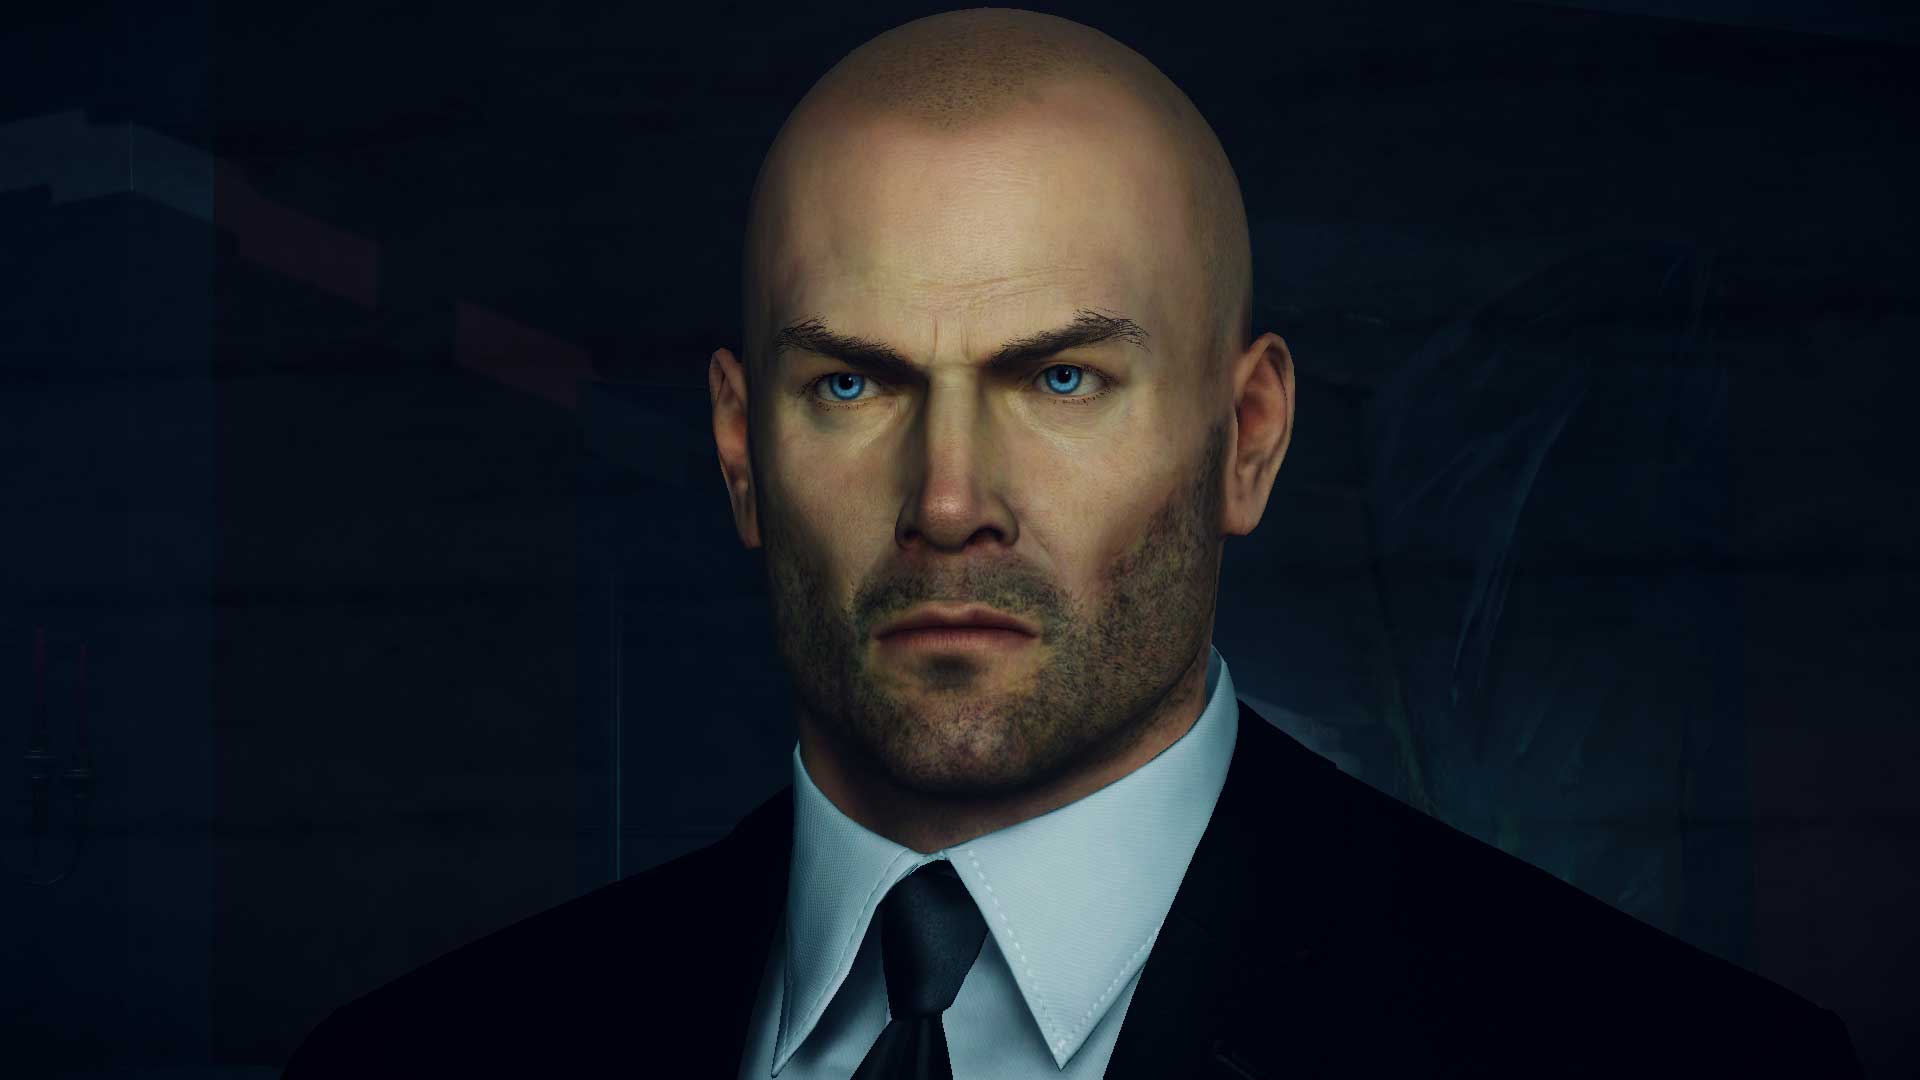 Is the any way I could mod the Hitman 3 suit textures? I'm trying